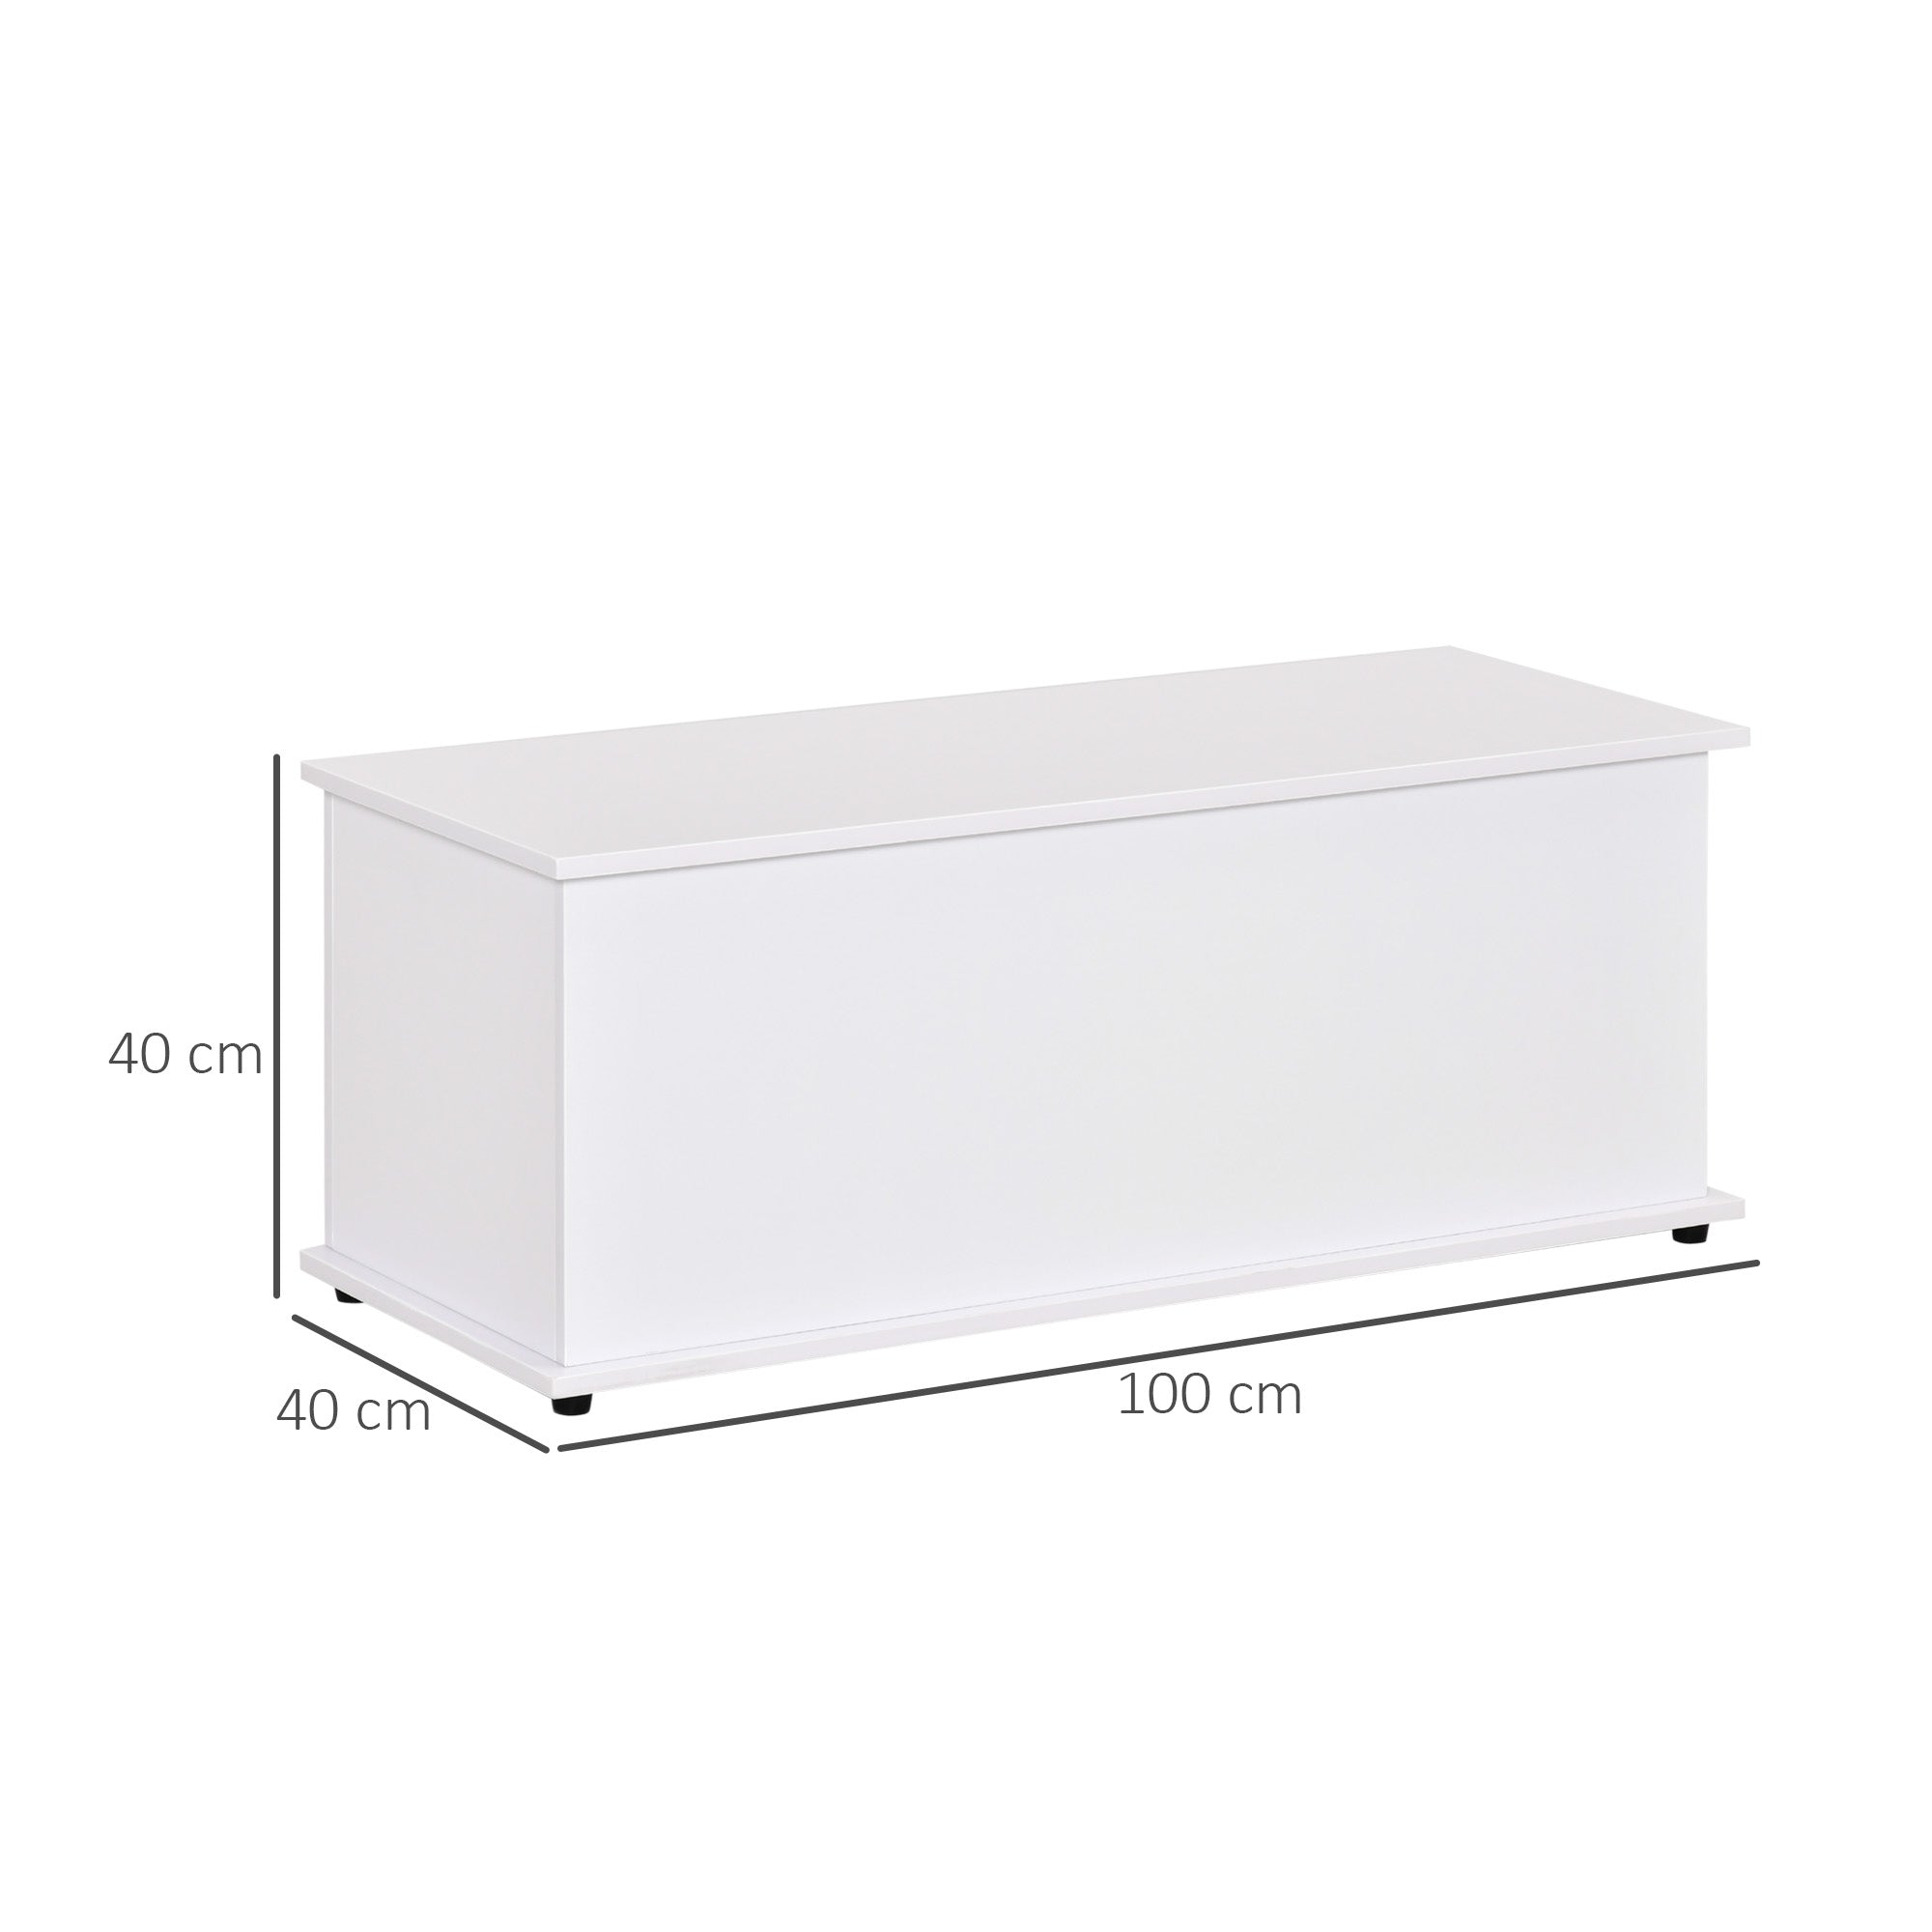 HOMCOM Wooden Storage Box Clothes Toy Chest Bench Seat Ottoman Bedding Blanket Trunk Container with Lid - White - Inspirely